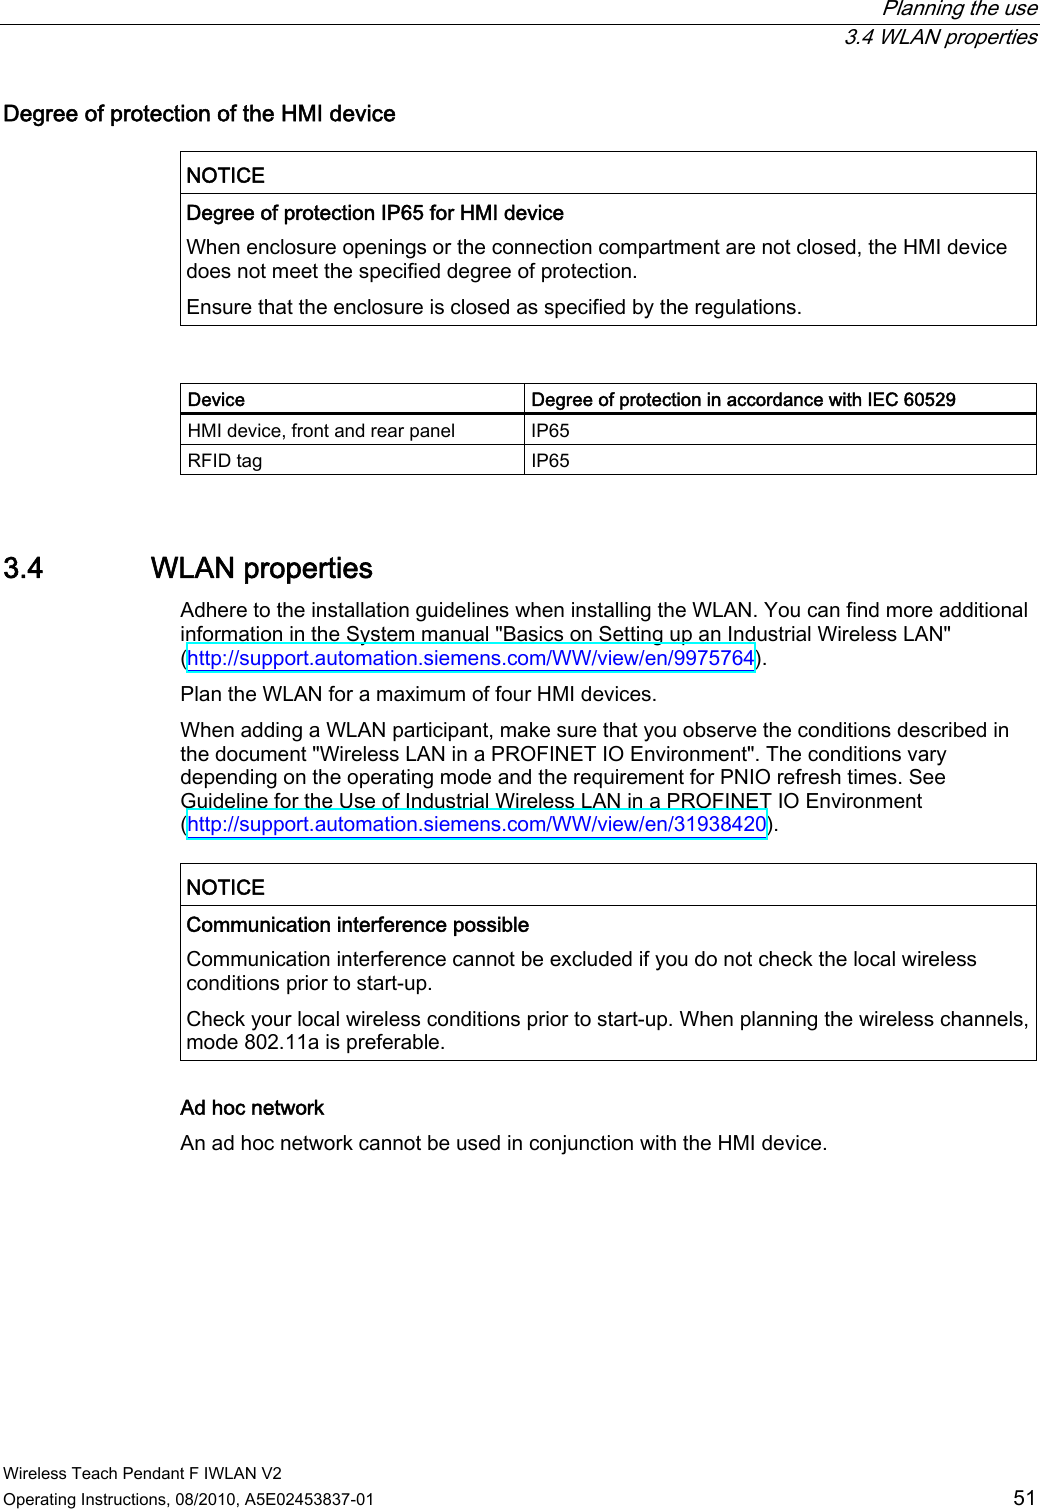  Planning the use  3.4 WLAN properties Wireless Teach Pendant F IWLAN V2 Operating Instructions, 08/2010, A5E02453837-01  51 Degree of protection of the HMI device   NOTICE  Degree of protection IP65 for HMI device When enclosure openings or the connection compartment are not closed, the HMI device does not meet the specified degree of protection. Ensure that the enclosure is closed as specified by the regulations.   Device  Degree of protection in accordance with IEC 60529 HMI device, front and rear panel  IP65 RFID tag  IP65 3.4 WLAN properties Adhere to the installation guidelines when installing the WLAN. You can find more additional information in the System manual &quot;Basics on Setting up an Industrial Wireless LAN&quot; (http://support.automation.siemens.com/WW/view/en/9975764). Plan the WLAN for a maximum of four HMI devices. When adding a WLAN participant, make sure that you observe the conditions described in the document &quot;Wireless LAN in a PROFINET IO Environment&quot;. The conditions vary depending on the operating mode and the requirement for PNIO refresh times. See Guideline for the Use of Industrial Wireless LAN in a PROFINET IO Environment (http://support.automation.siemens.com/WW/view/en/31938420).  NOTICE  Communication interference possible Communication interference cannot be excluded if you do not check the local wireless conditions prior to start-up. Check your local wireless conditions prior to start-up. When planning the wireless channels, mode 802.11a is preferable.  Ad hoc network An ad hoc network cannot be used in conjunction with the HMI device. PRELIMINARY II 1.7.2010